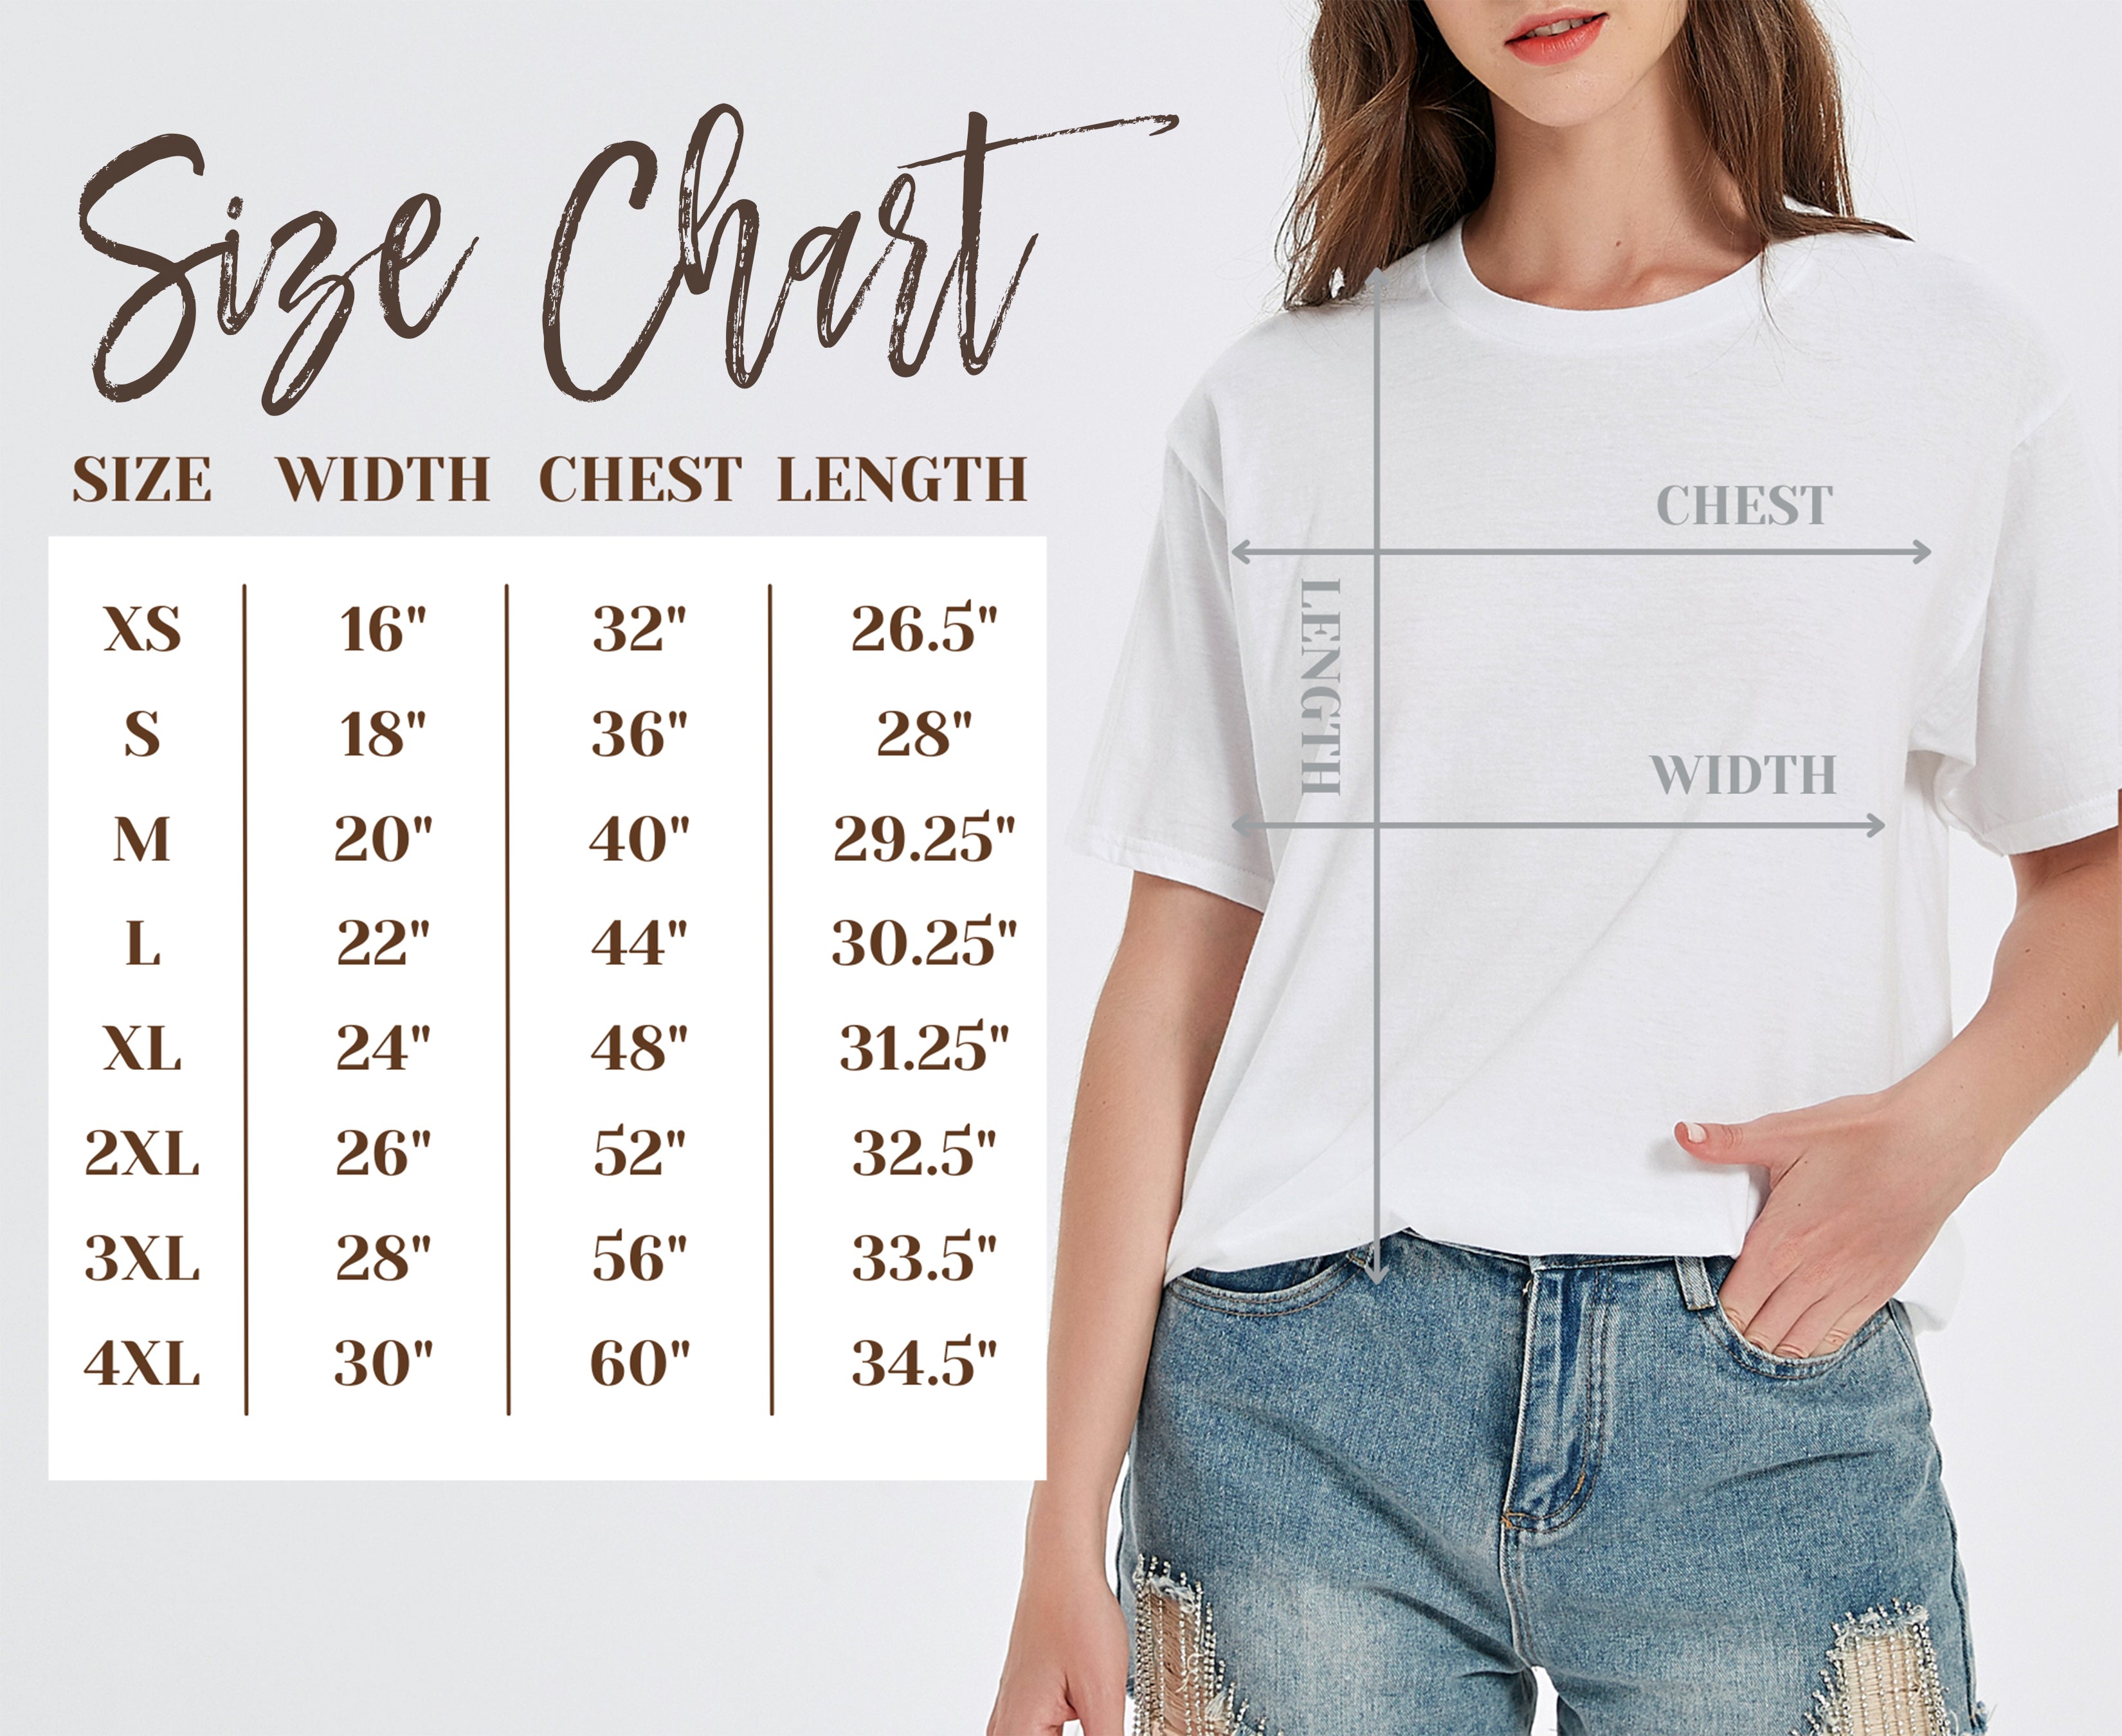 On the First Day of School, a teacher dons a white First Day of School T-Shirt displaying a helpful size chart.